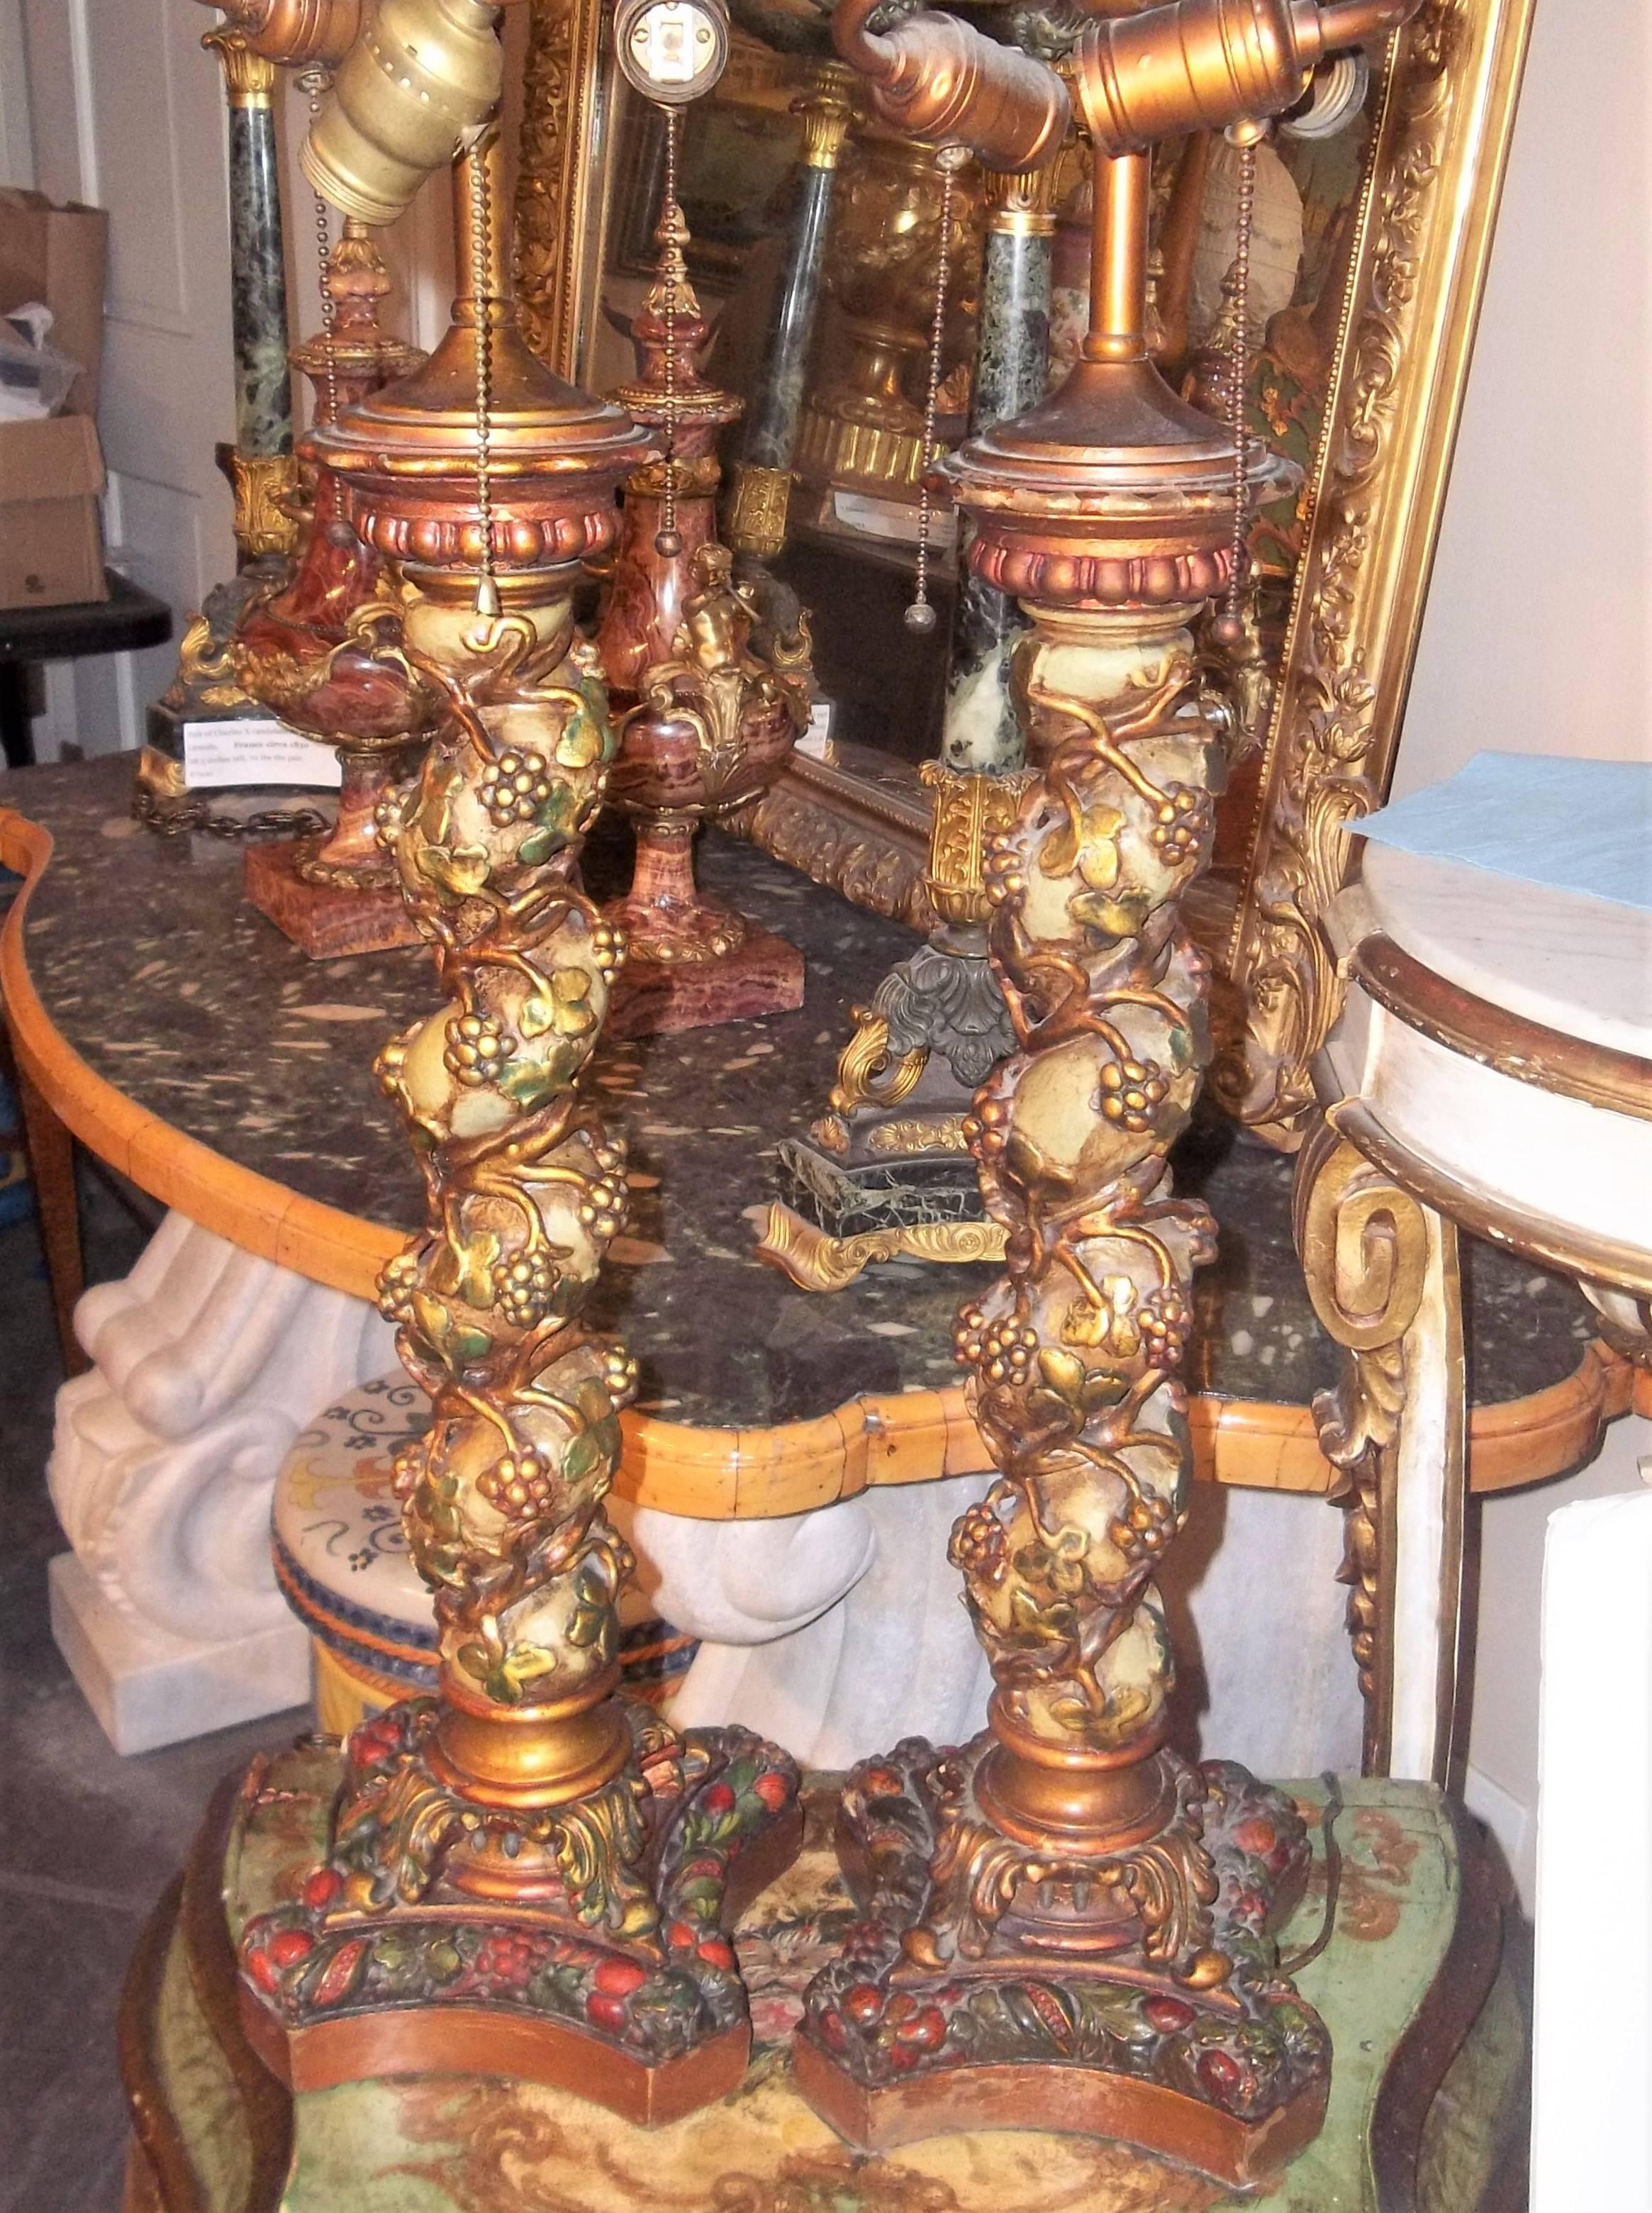 With a pale green ground with climbing grape vines. Centred upon bases of fruit and foliage .The column pretty much the same appearance all around, circa 1920s. 

Measurements of lamps including fittings 33.5 inches, base 7 inch square
Column and